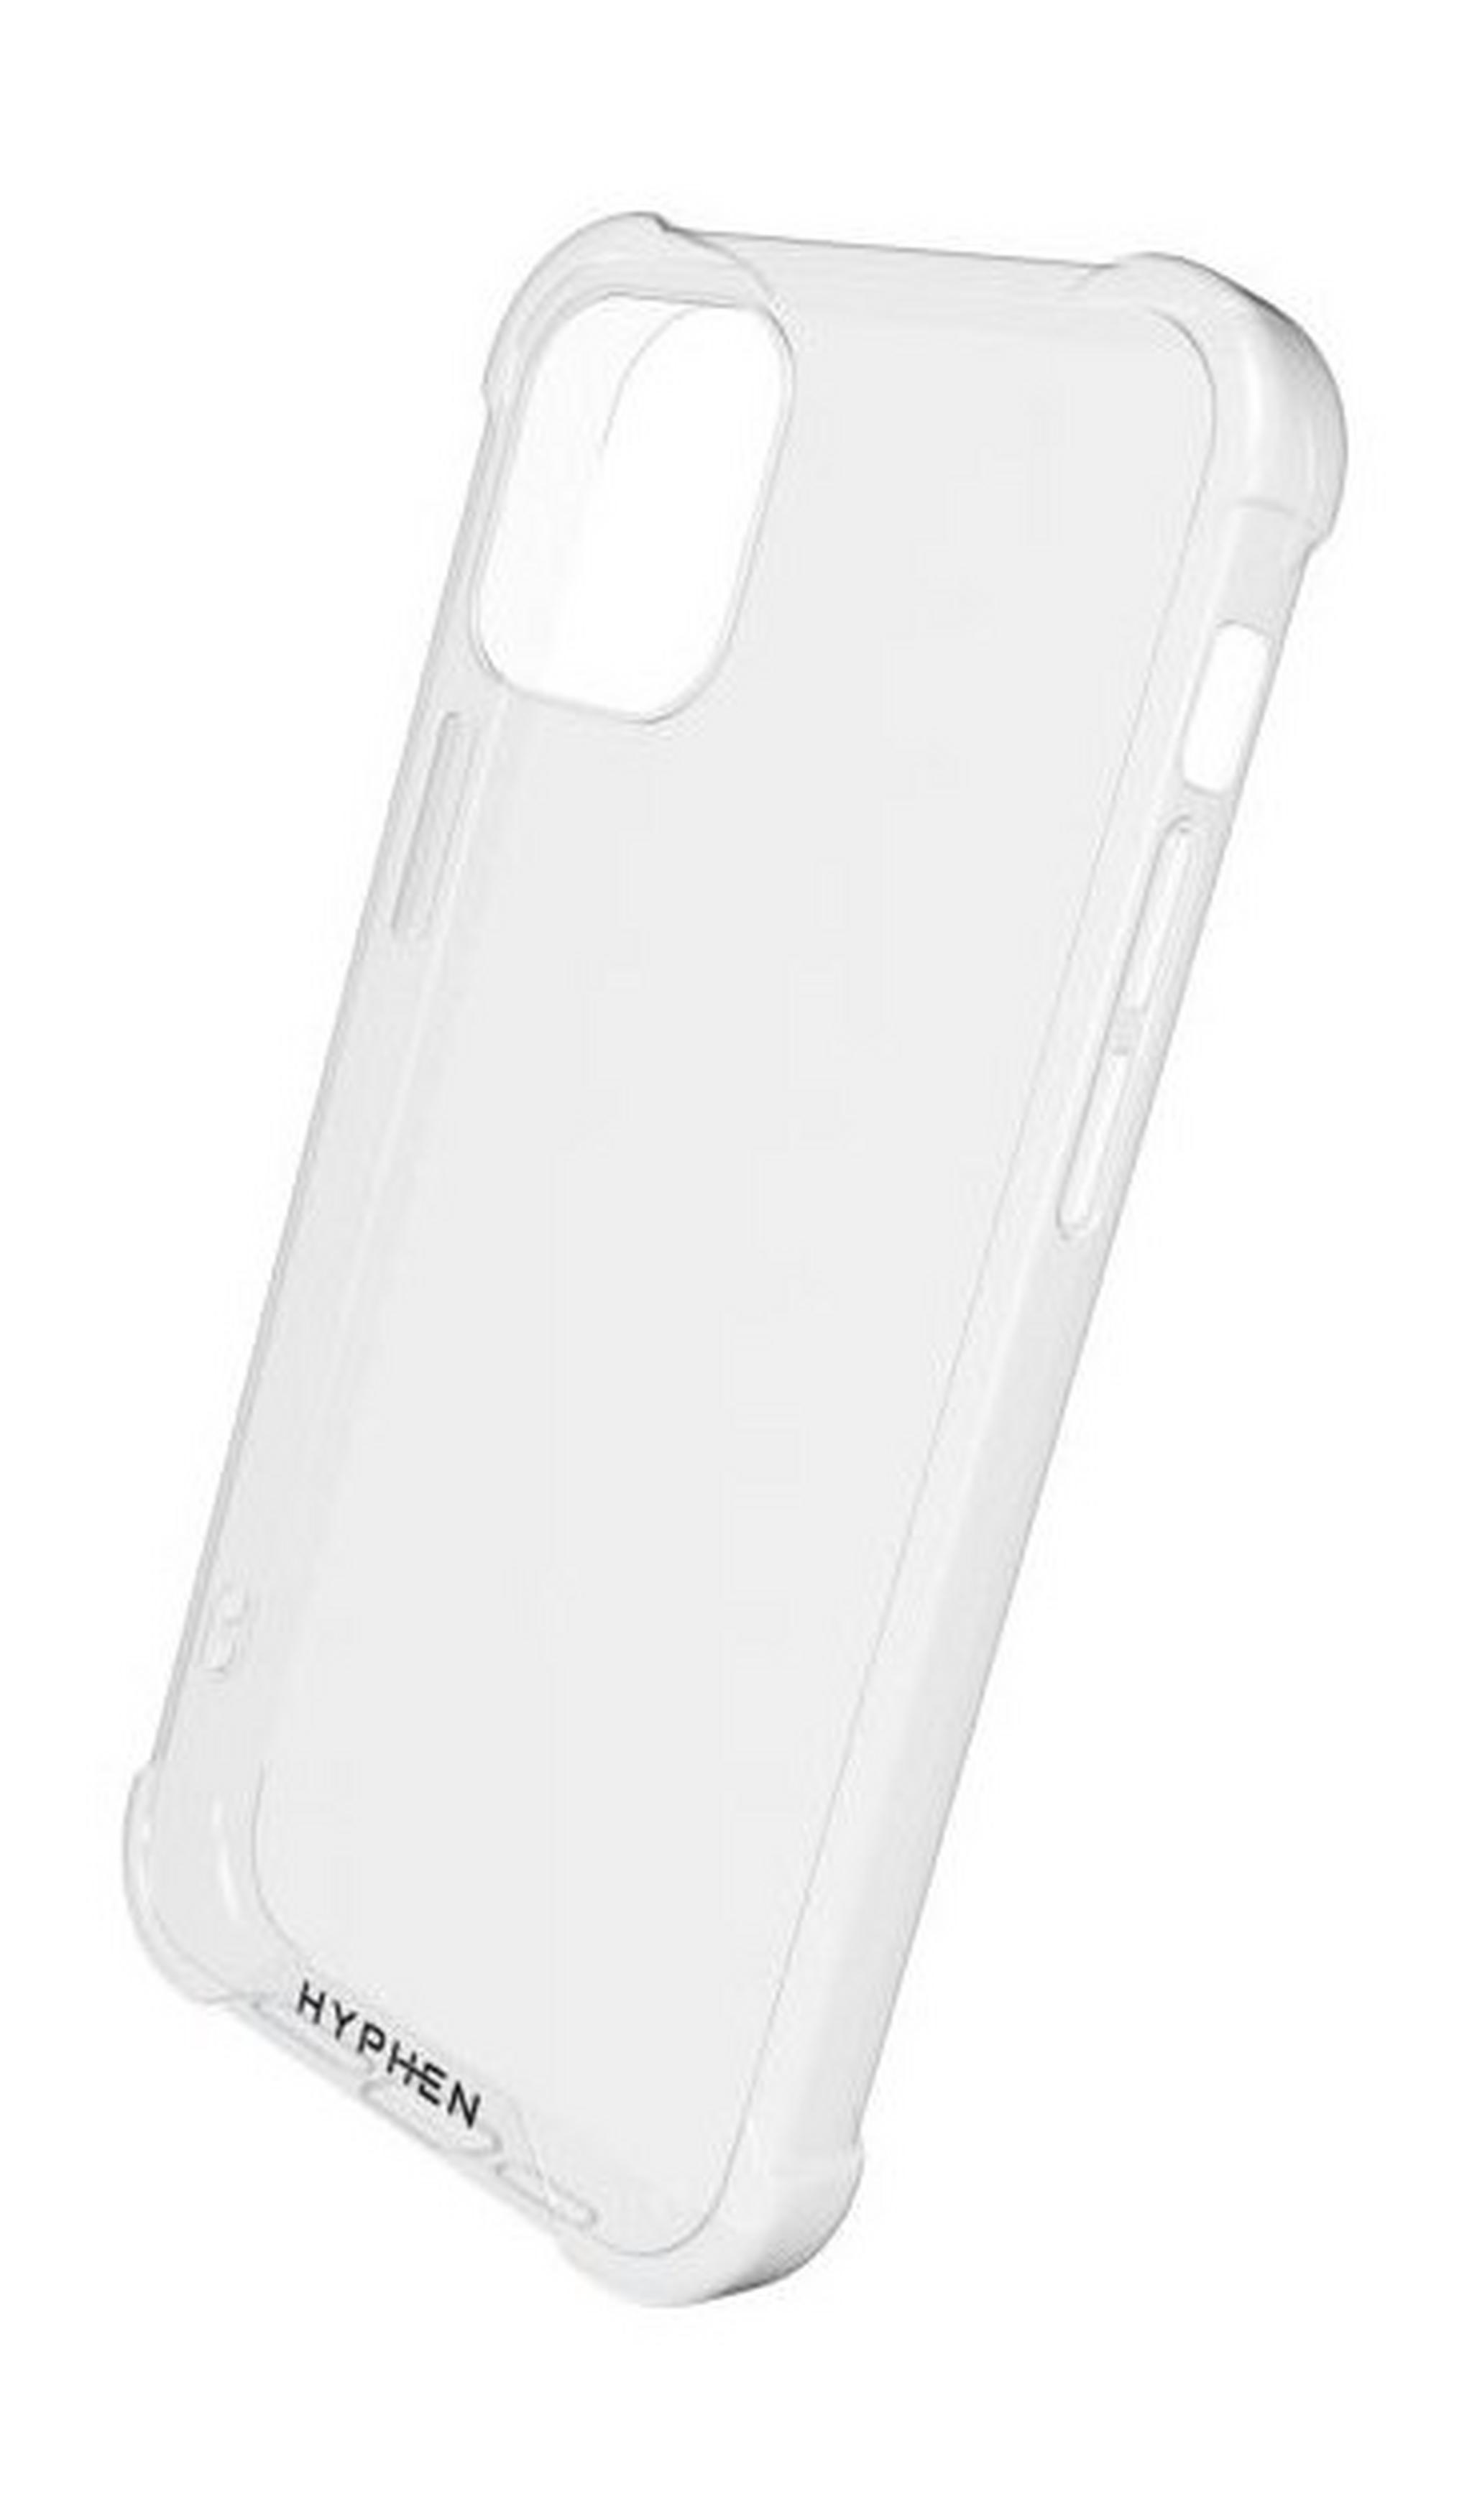 Hyphen iPhone 12 Pro Drop Protection Case - Clear